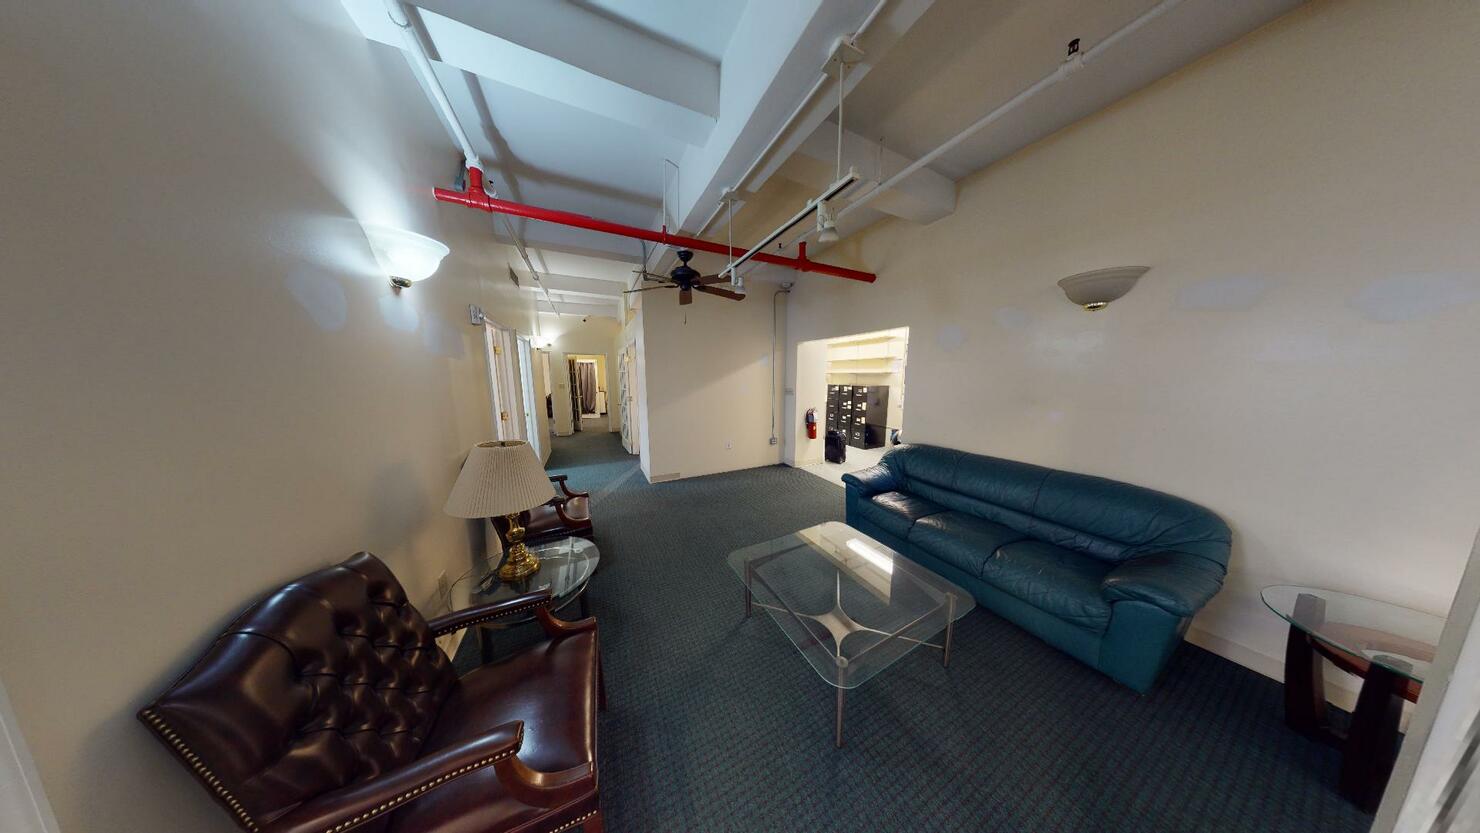 247 West 35th Street Office Space - Waiting Area